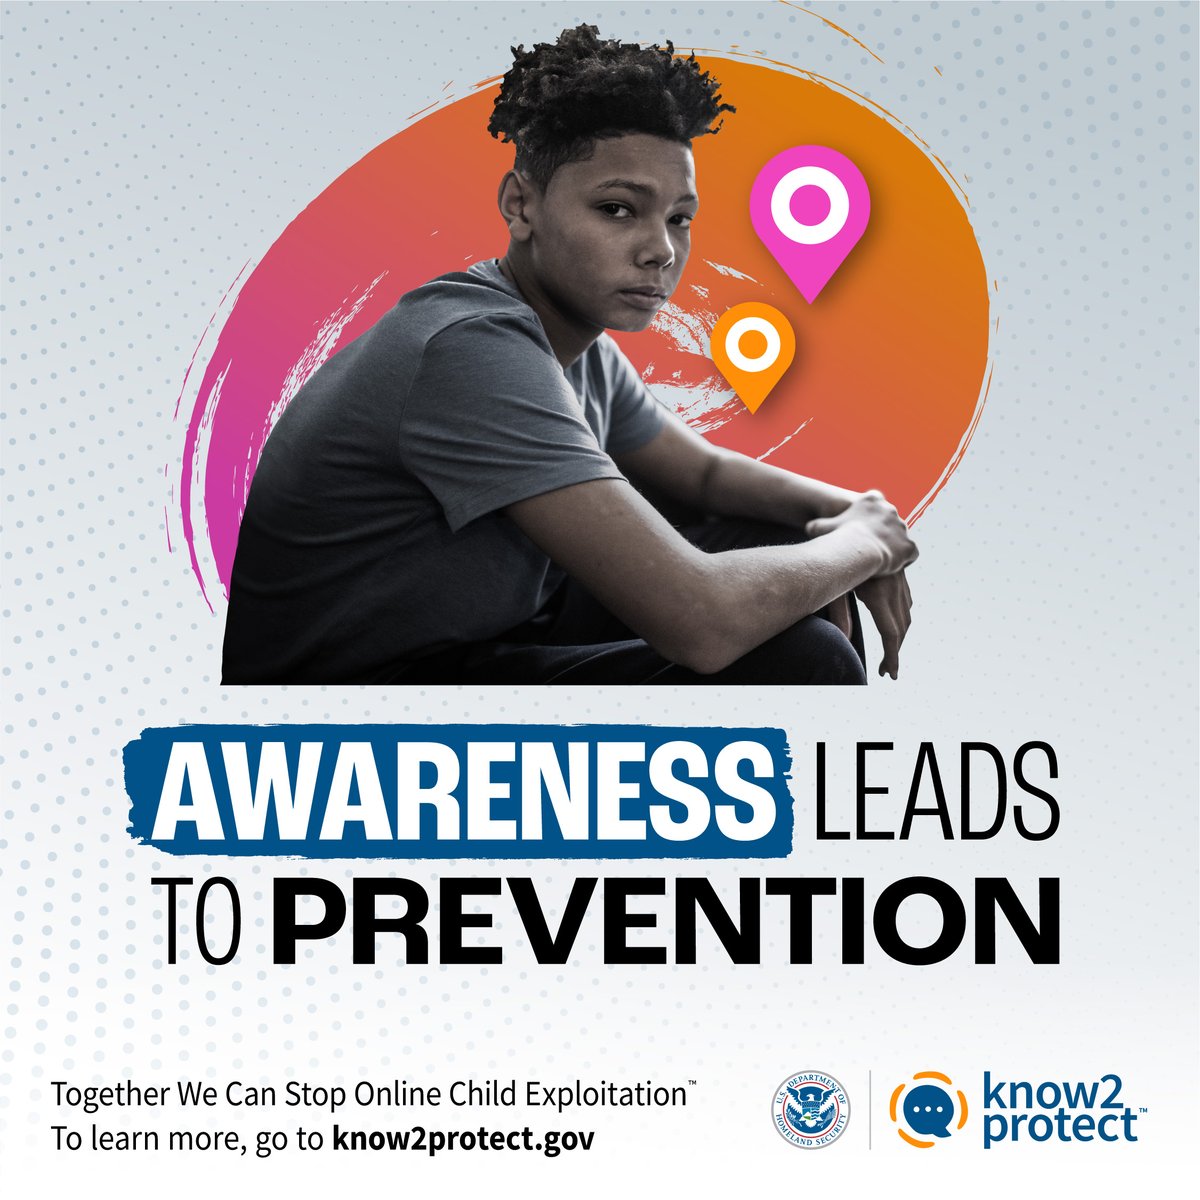 Online child sexual exploitation does not discriminate. It’s never too early to start open conversations about online safety with the people you care about. Together We Can Stop Online Child Exploitation™. To learn ways to #KeepKidsSafe online, visit know2protect.gov.